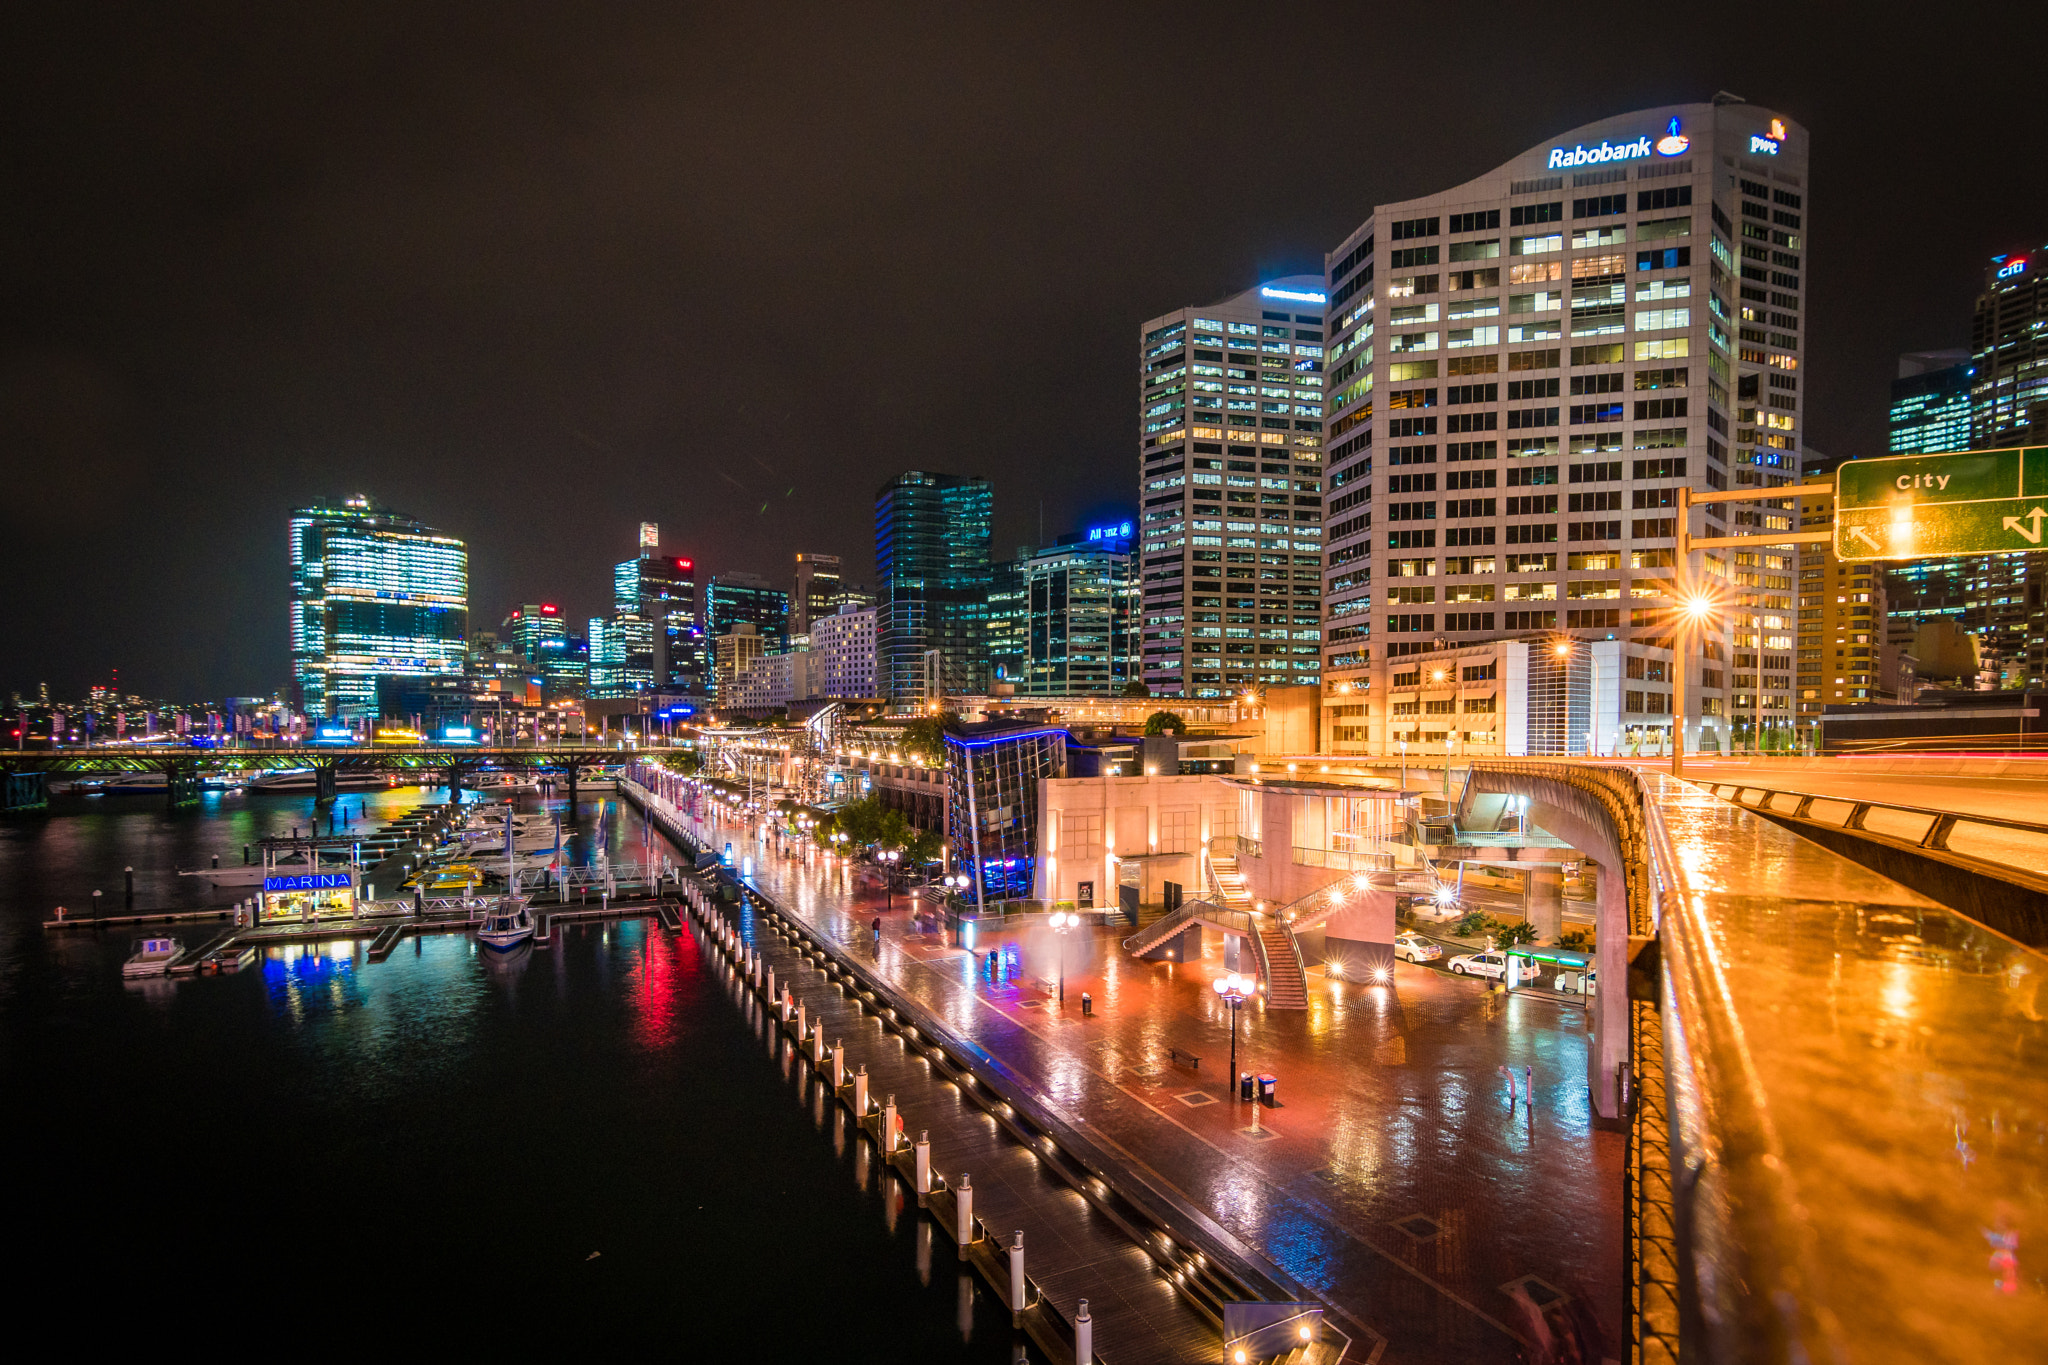 Sony a6300 + Sony DT 50mm F1.8 SAM sample photo. Darling harbour, sydney at night photography